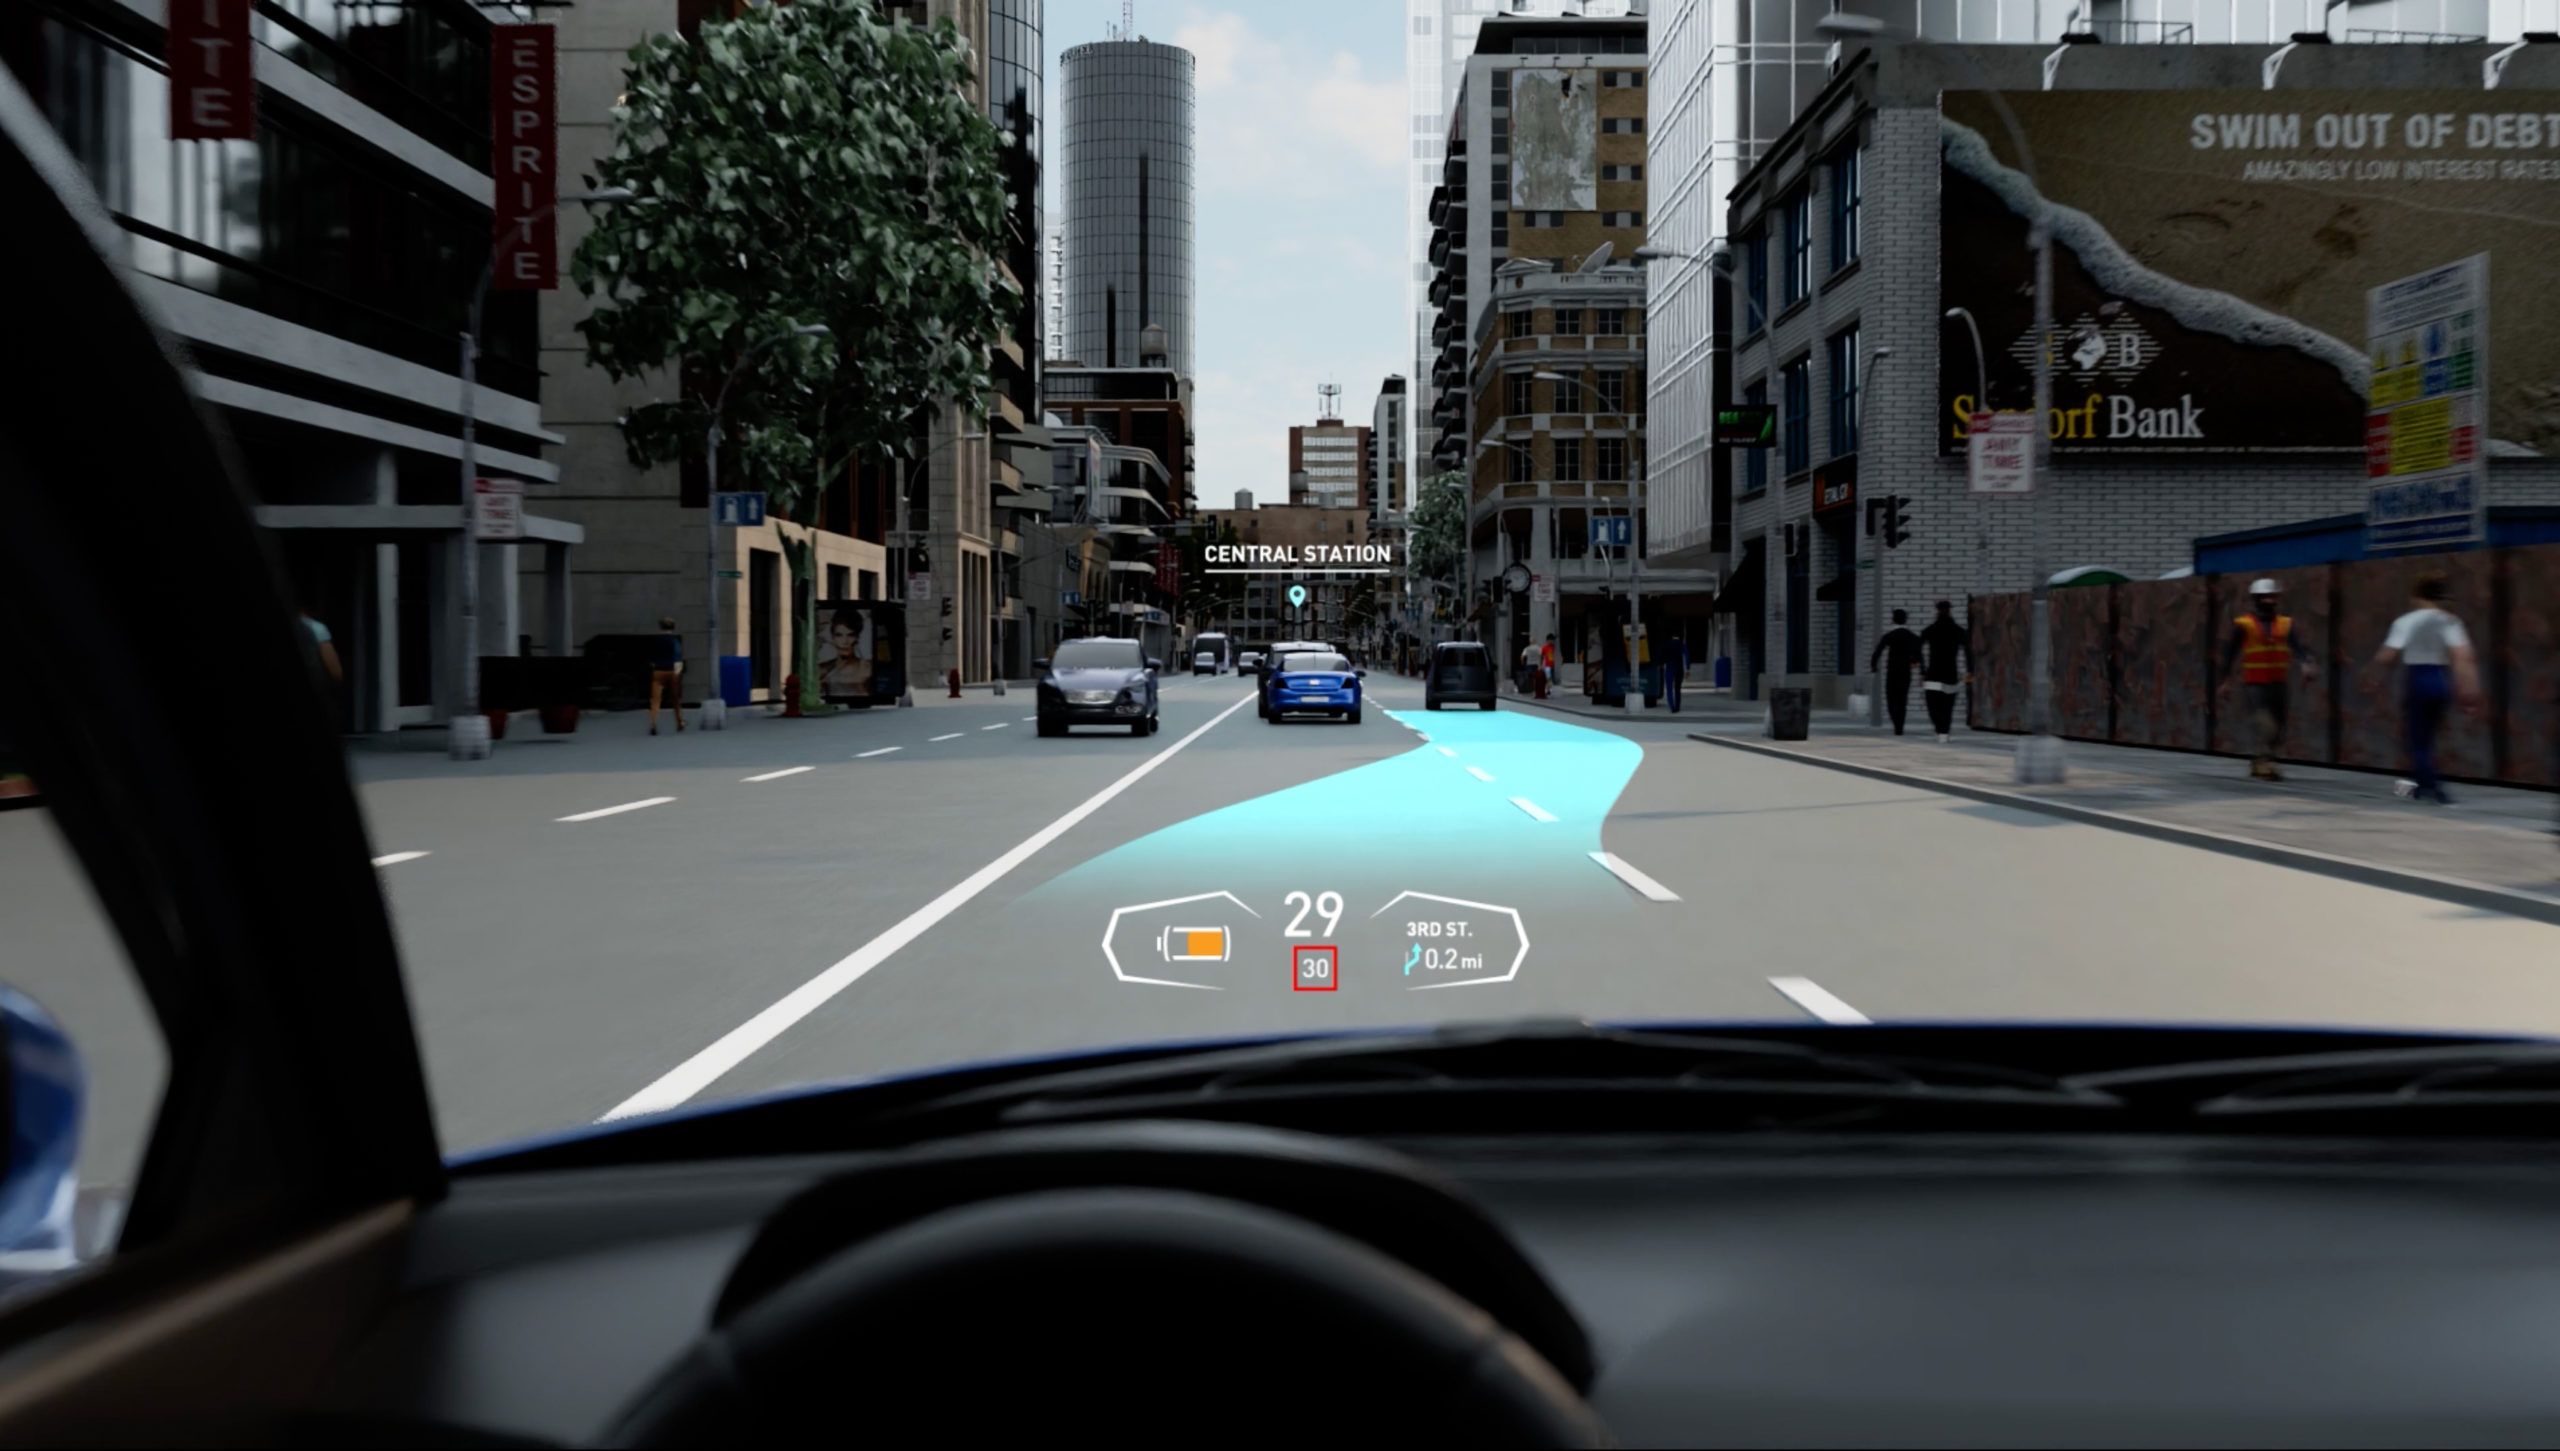 With In-Car AR, Drivers Get a New View of the Road Ahead